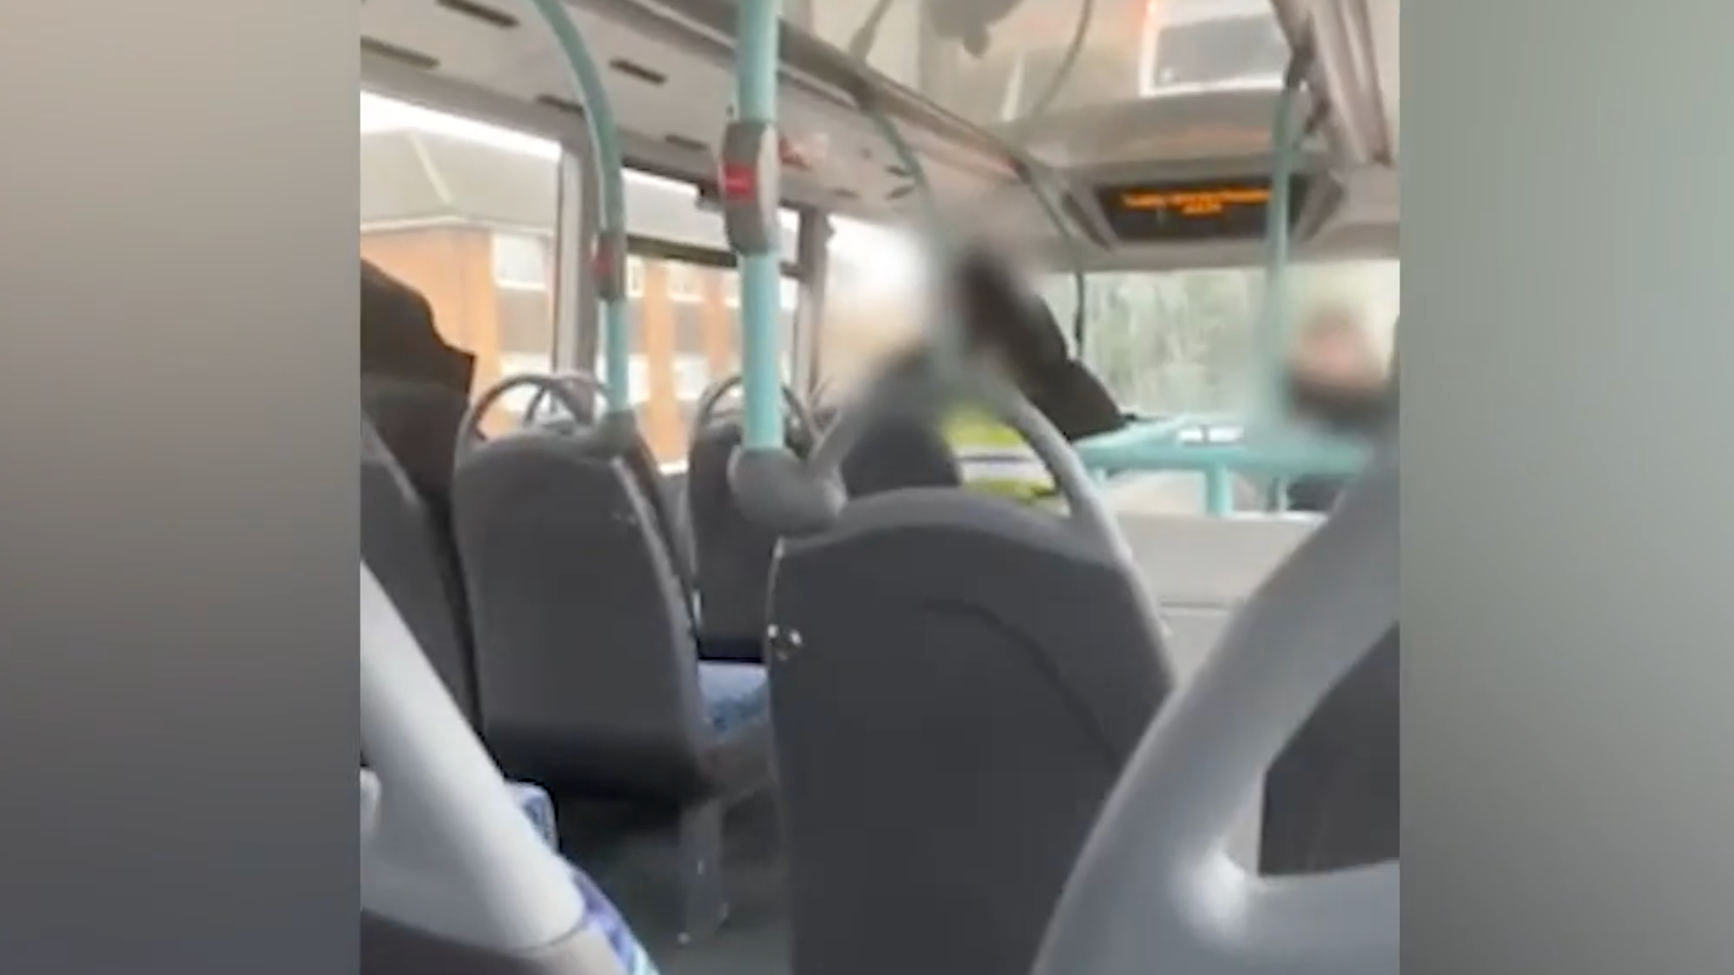 Bus Force Xxx - Schoolgirl, 13, 'punched and kicked by woman' in terrifying West London bus  attack | ITV News London